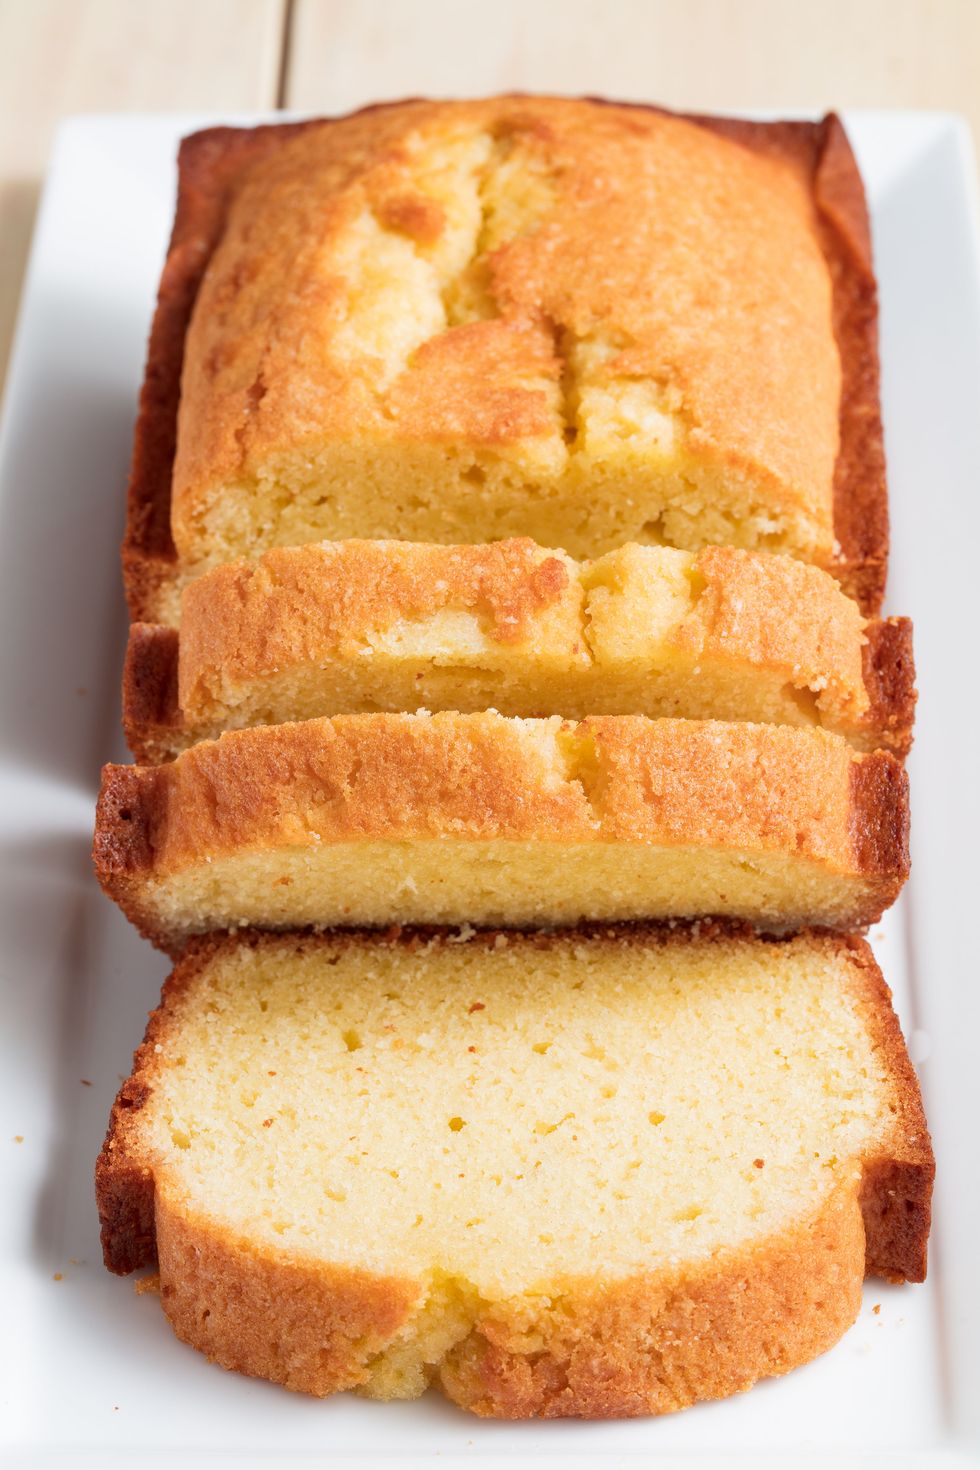 118 easy and tasty tube pan pound cake recipes by home cooks - Cookpad